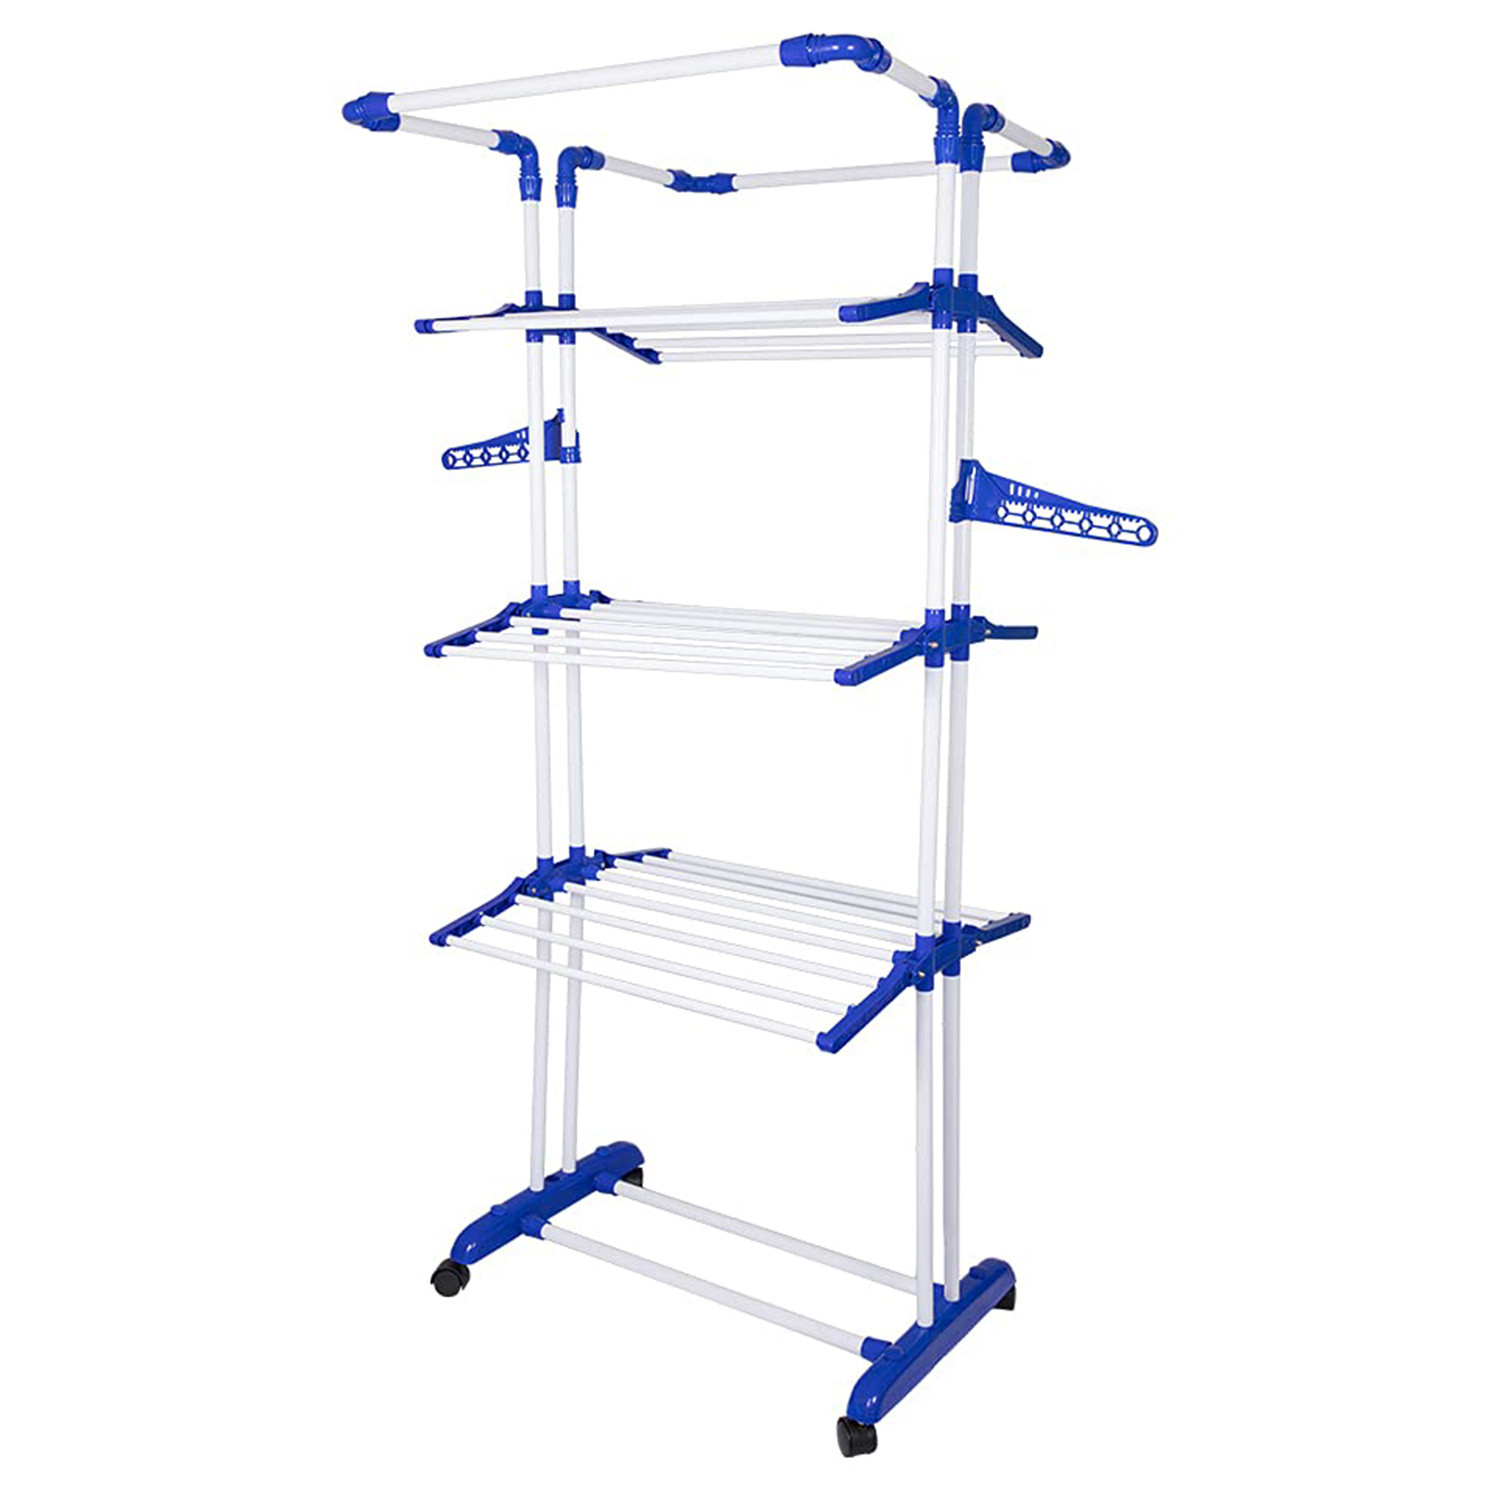 Kuber Industries Stainless Steel 4-Tier Movable Laundry Clothes Rack|Cloth Drying Stand With Wheels for Balcony & Outdoor (Blue)